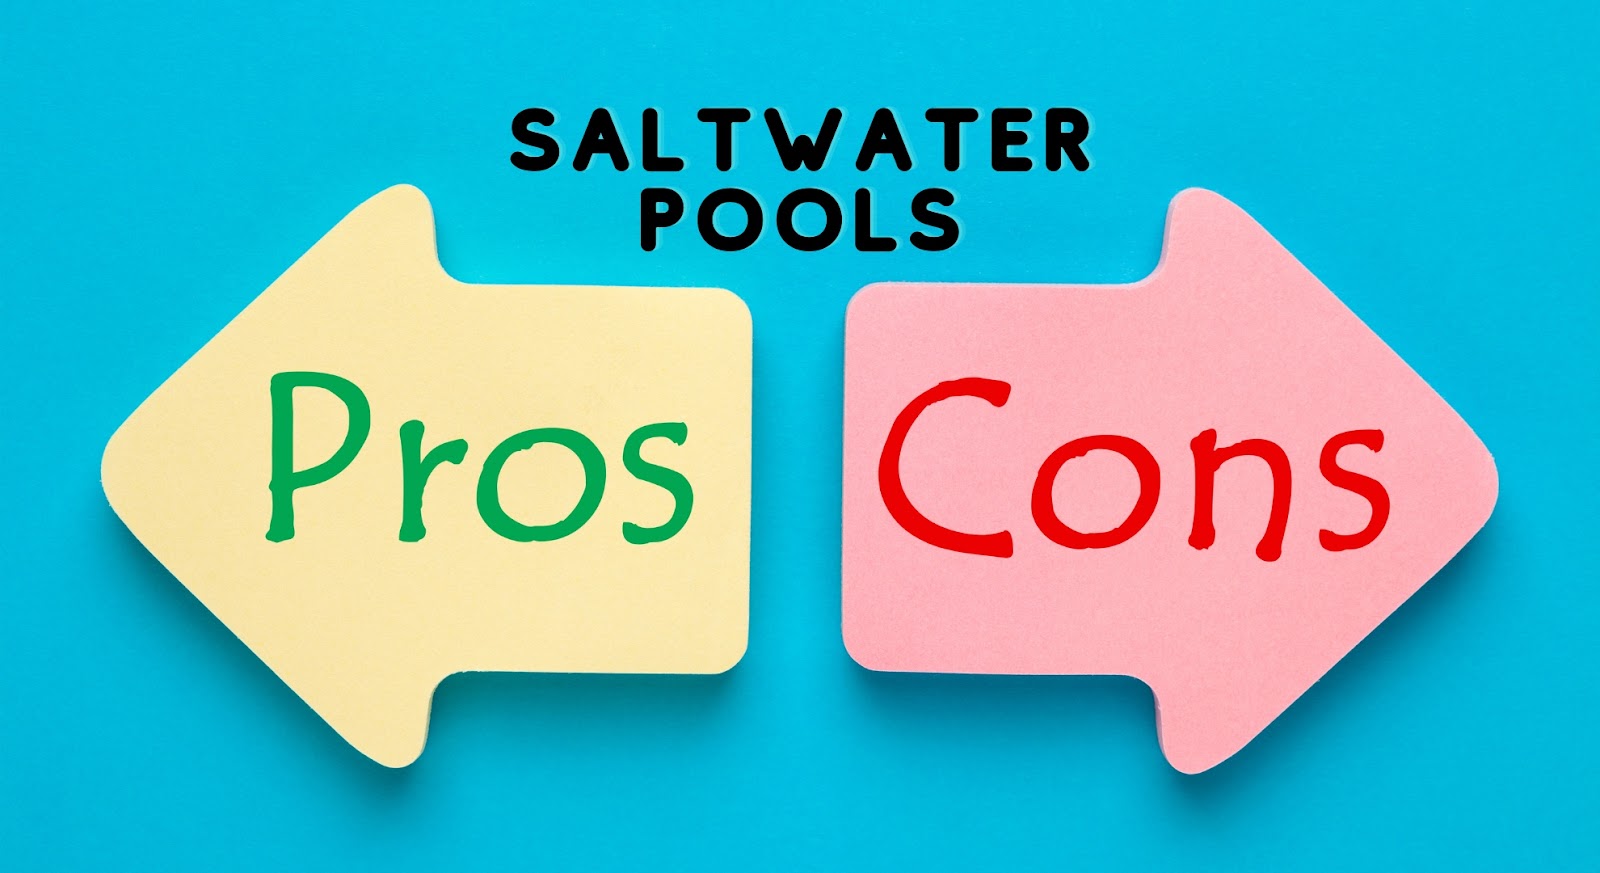 Saltwater Pools: Pros and Cons